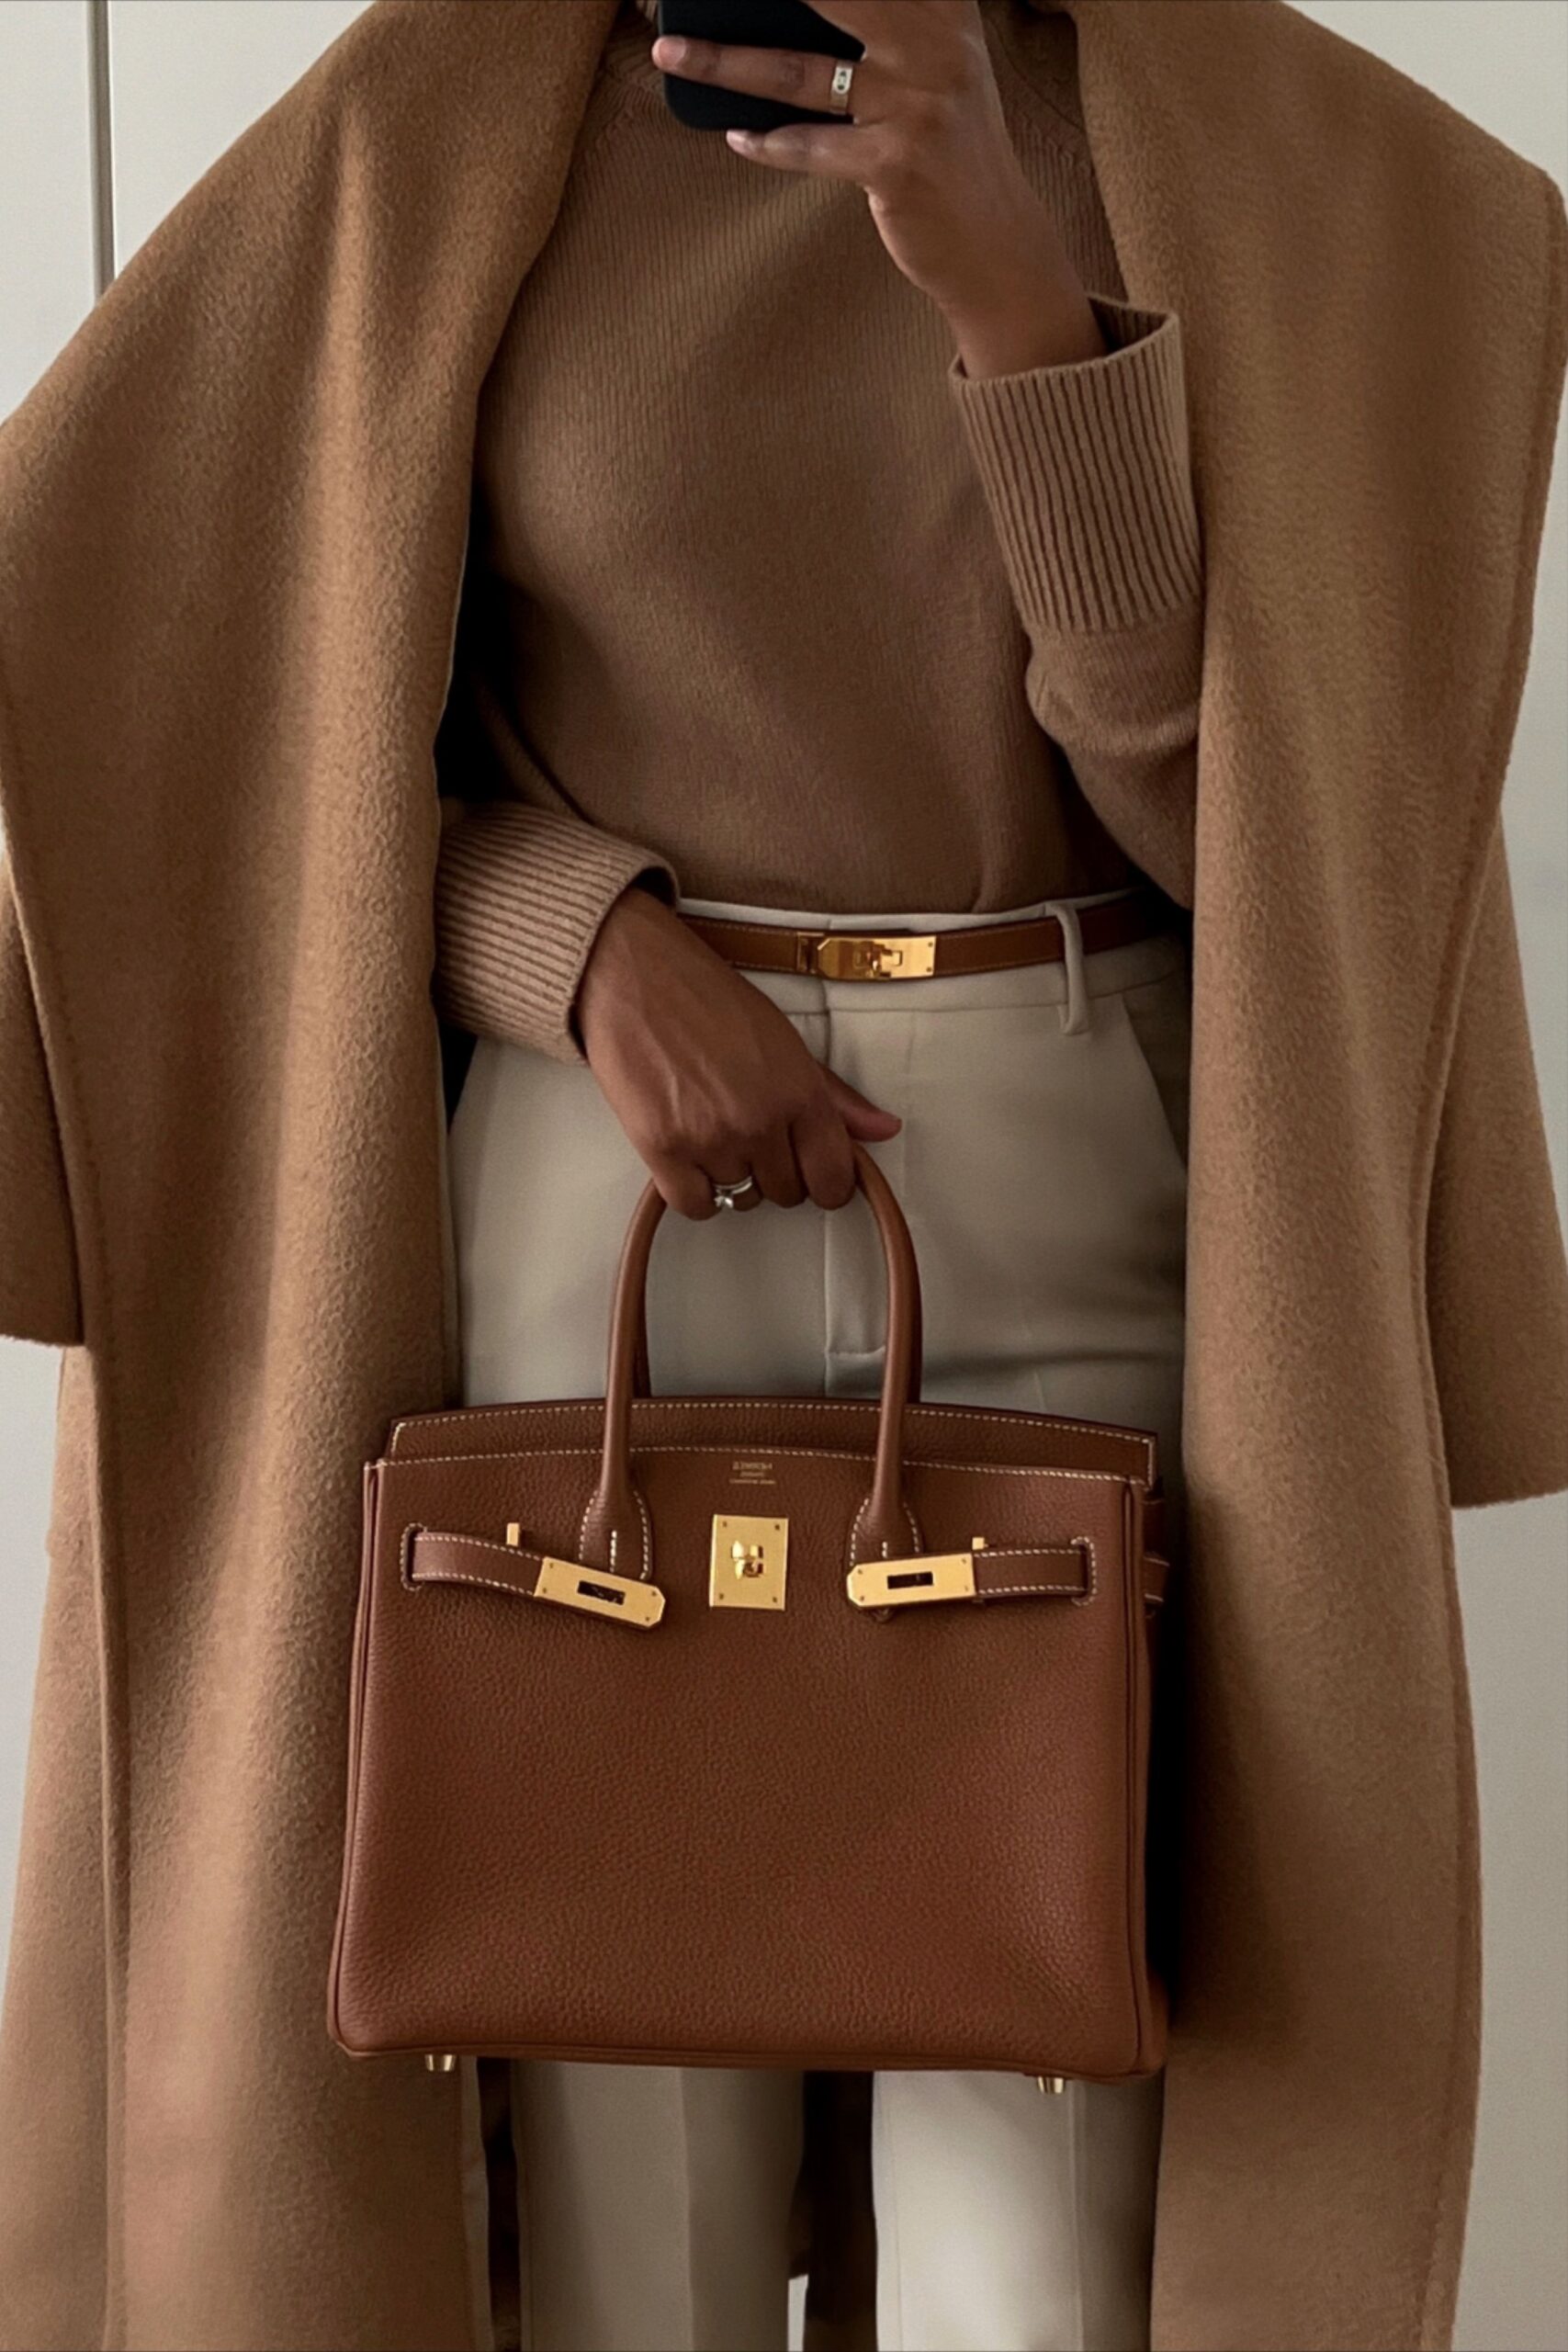 Styling Tips for Your Camel Coat